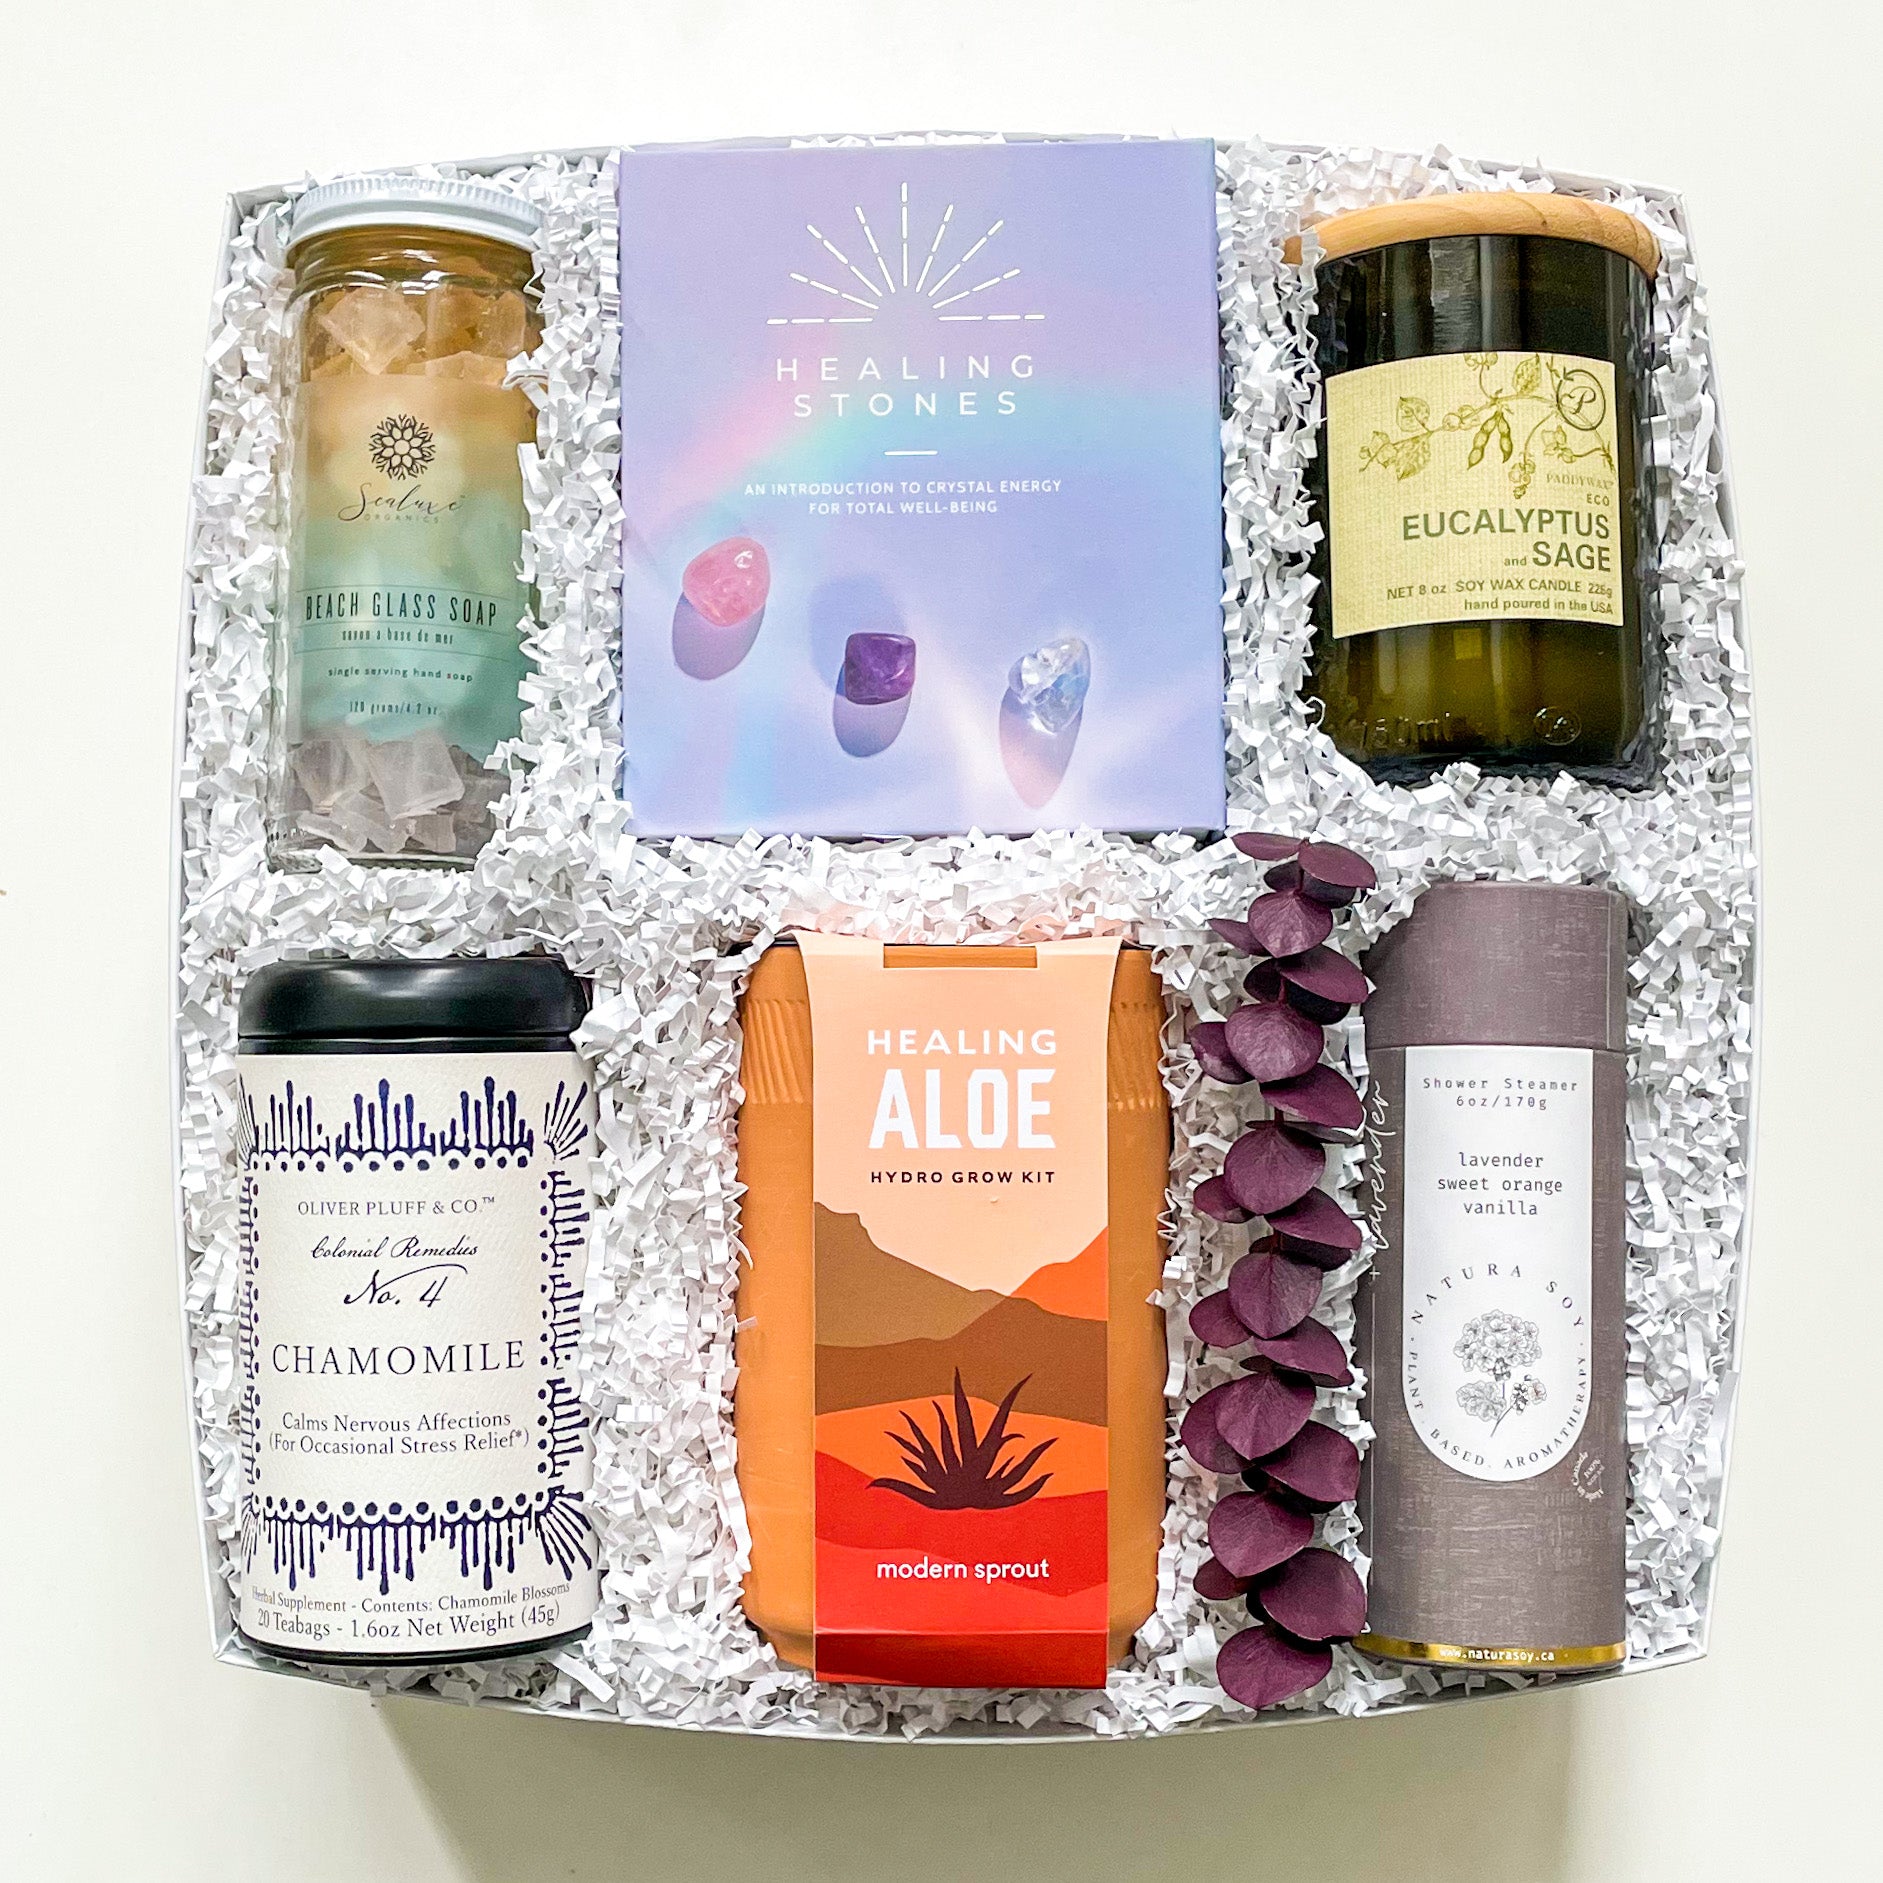 Wellness Gift, Wellness Gift Delivered, Shipped Wellness Gift, Self Care Gift, Healing Gift, Wellness Gift Basket, Wellness Gift Box, Healing Gift Basket, Healing Gift Box, Self Care Gift Box, Self Care Gift BasketGifts For Her, Perfect Gift For Her, Women’s Gift, Women’s Gift Delivery, Birthday Gifts For Her, Gifts For Mom, Gifts For Girlfriend, Wife Gifts, Birthday Gift For Girlfriend, Birthday Gift For Mom